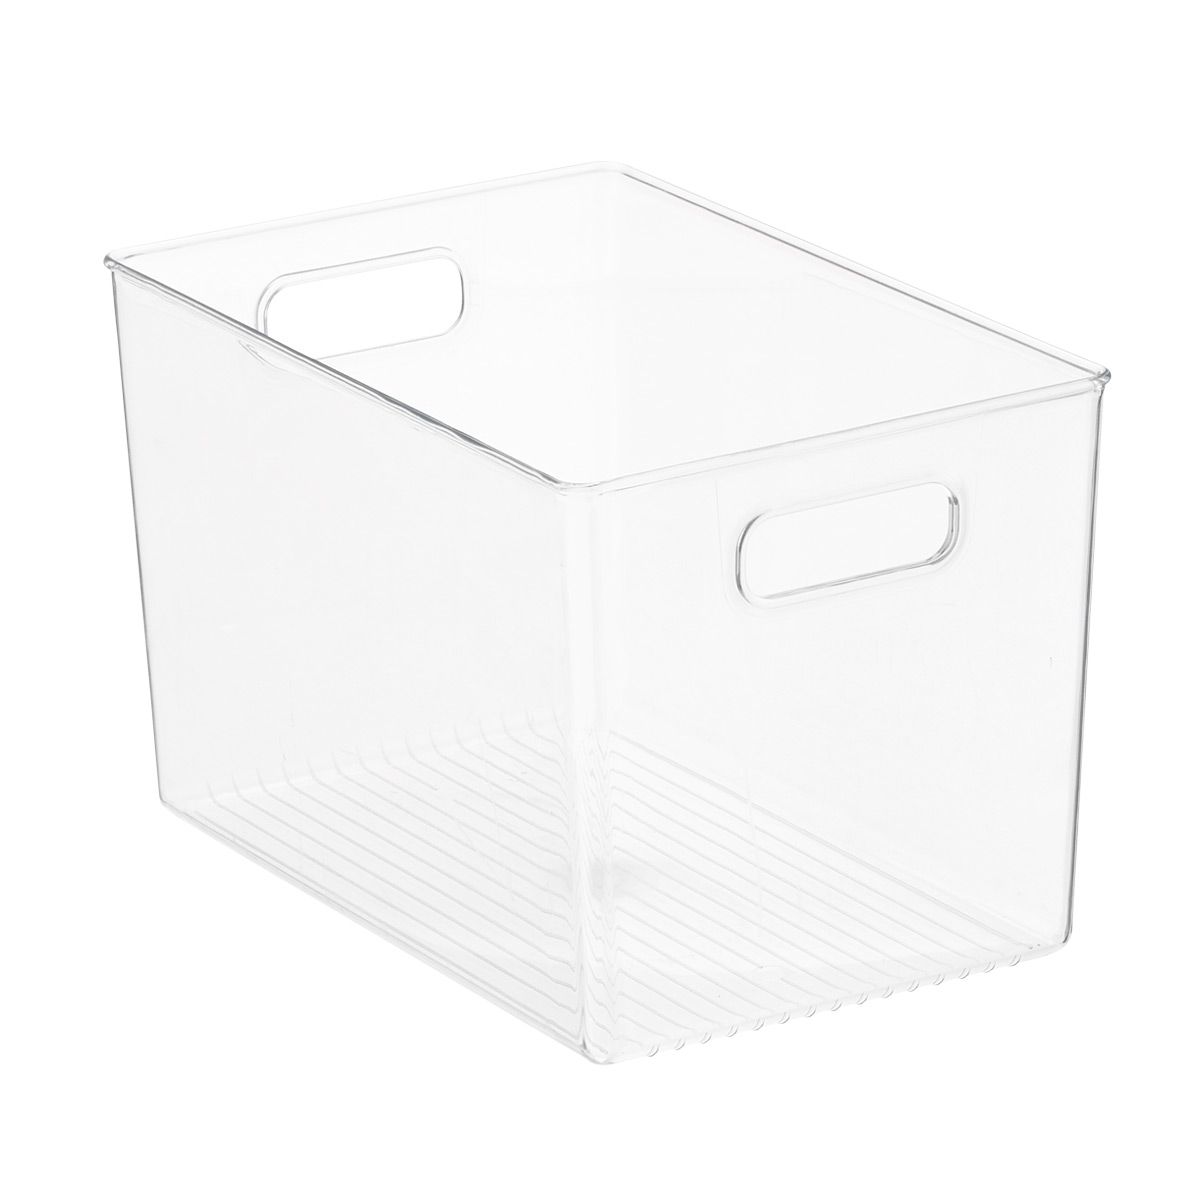 iDesign Linus Kitchen Bins | The Container Store